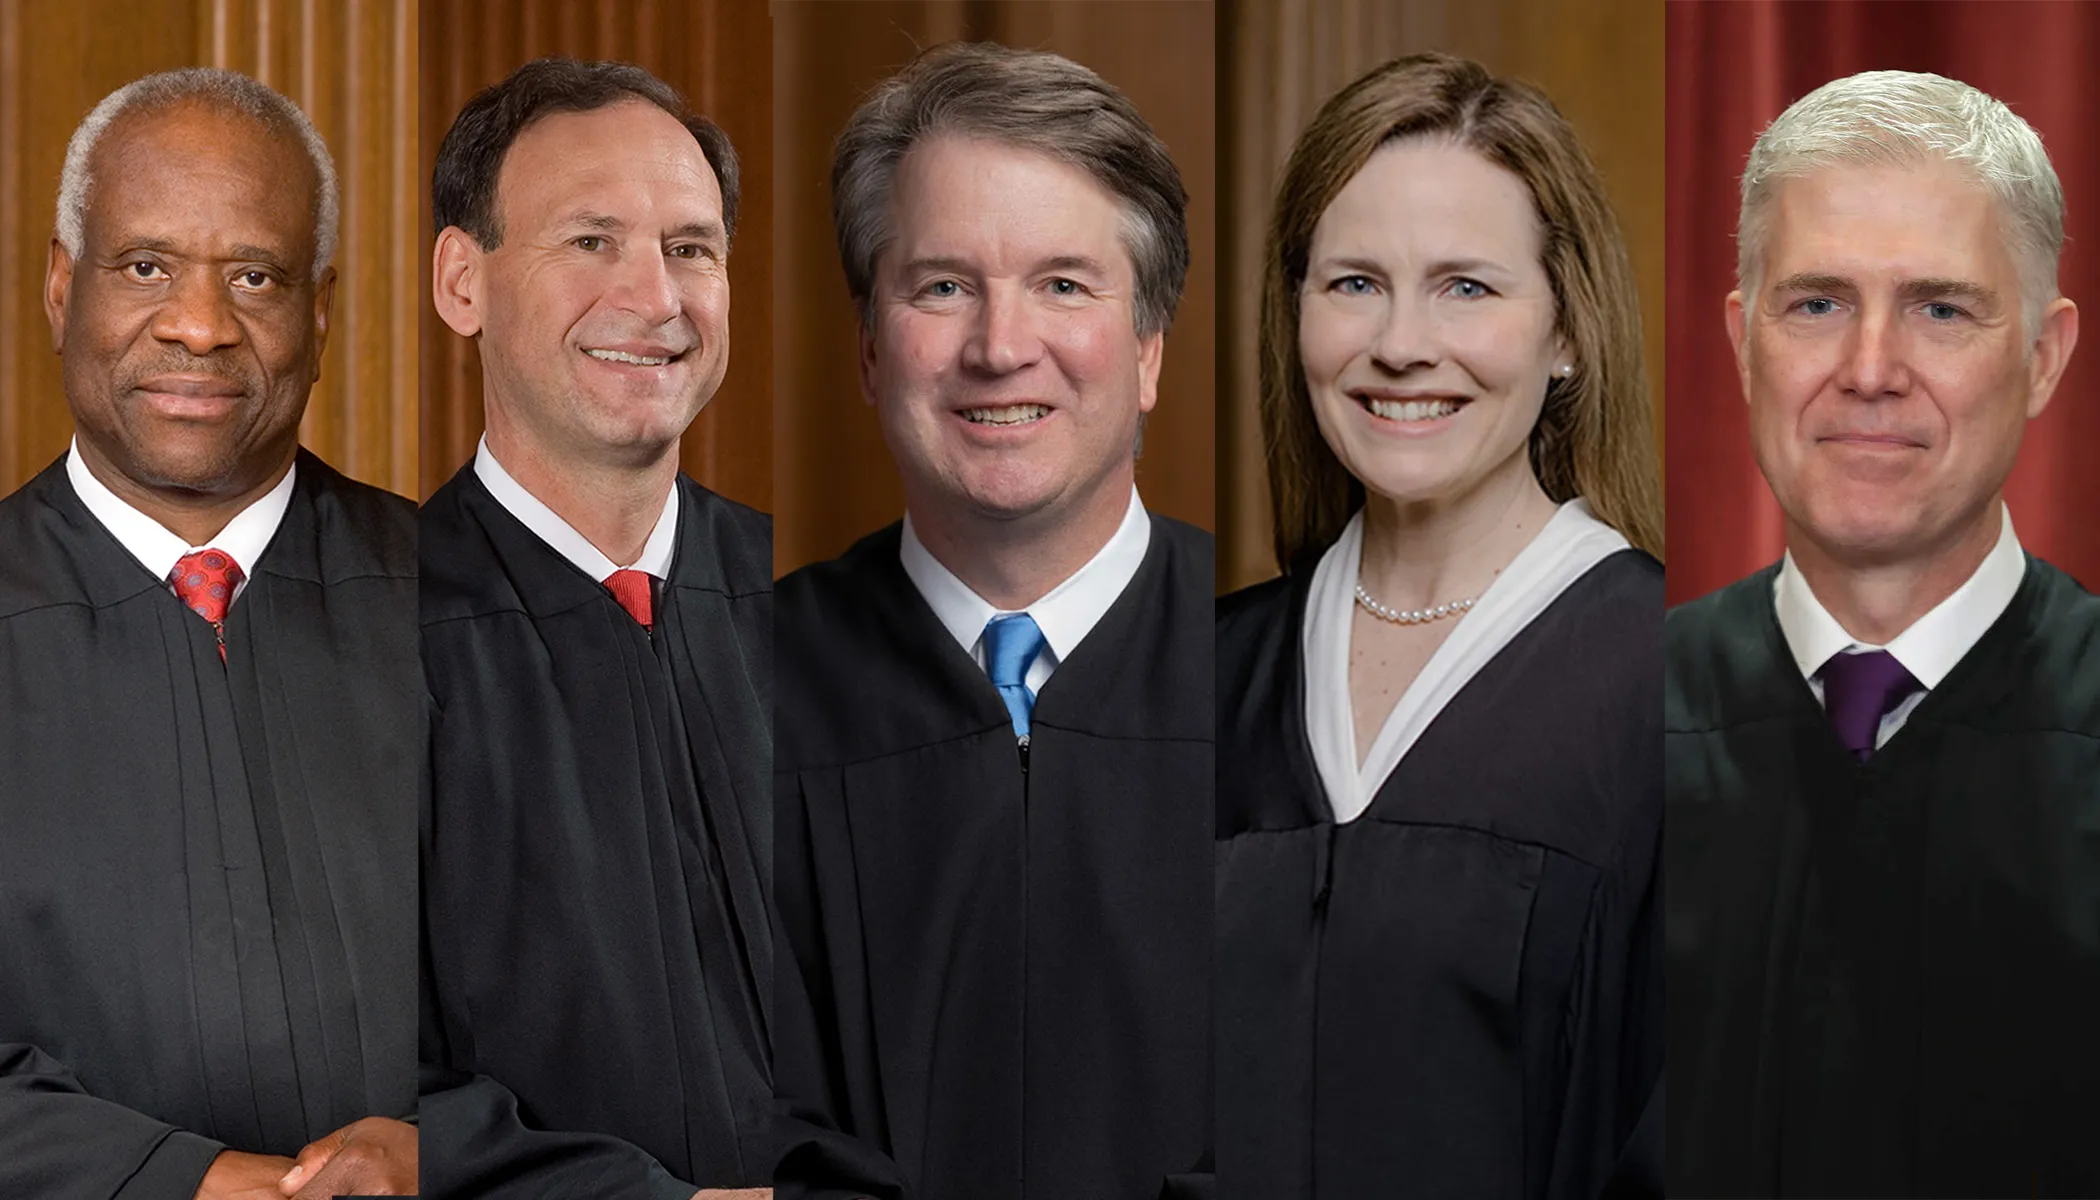 Left to right, Supreme Court associate justices Clarence Thomas, Samuel A. Alito Jr., Brett M. Kavanaugh, Amy Coney Barrett, and Neil M. Gorsuch.?w=200&h=150